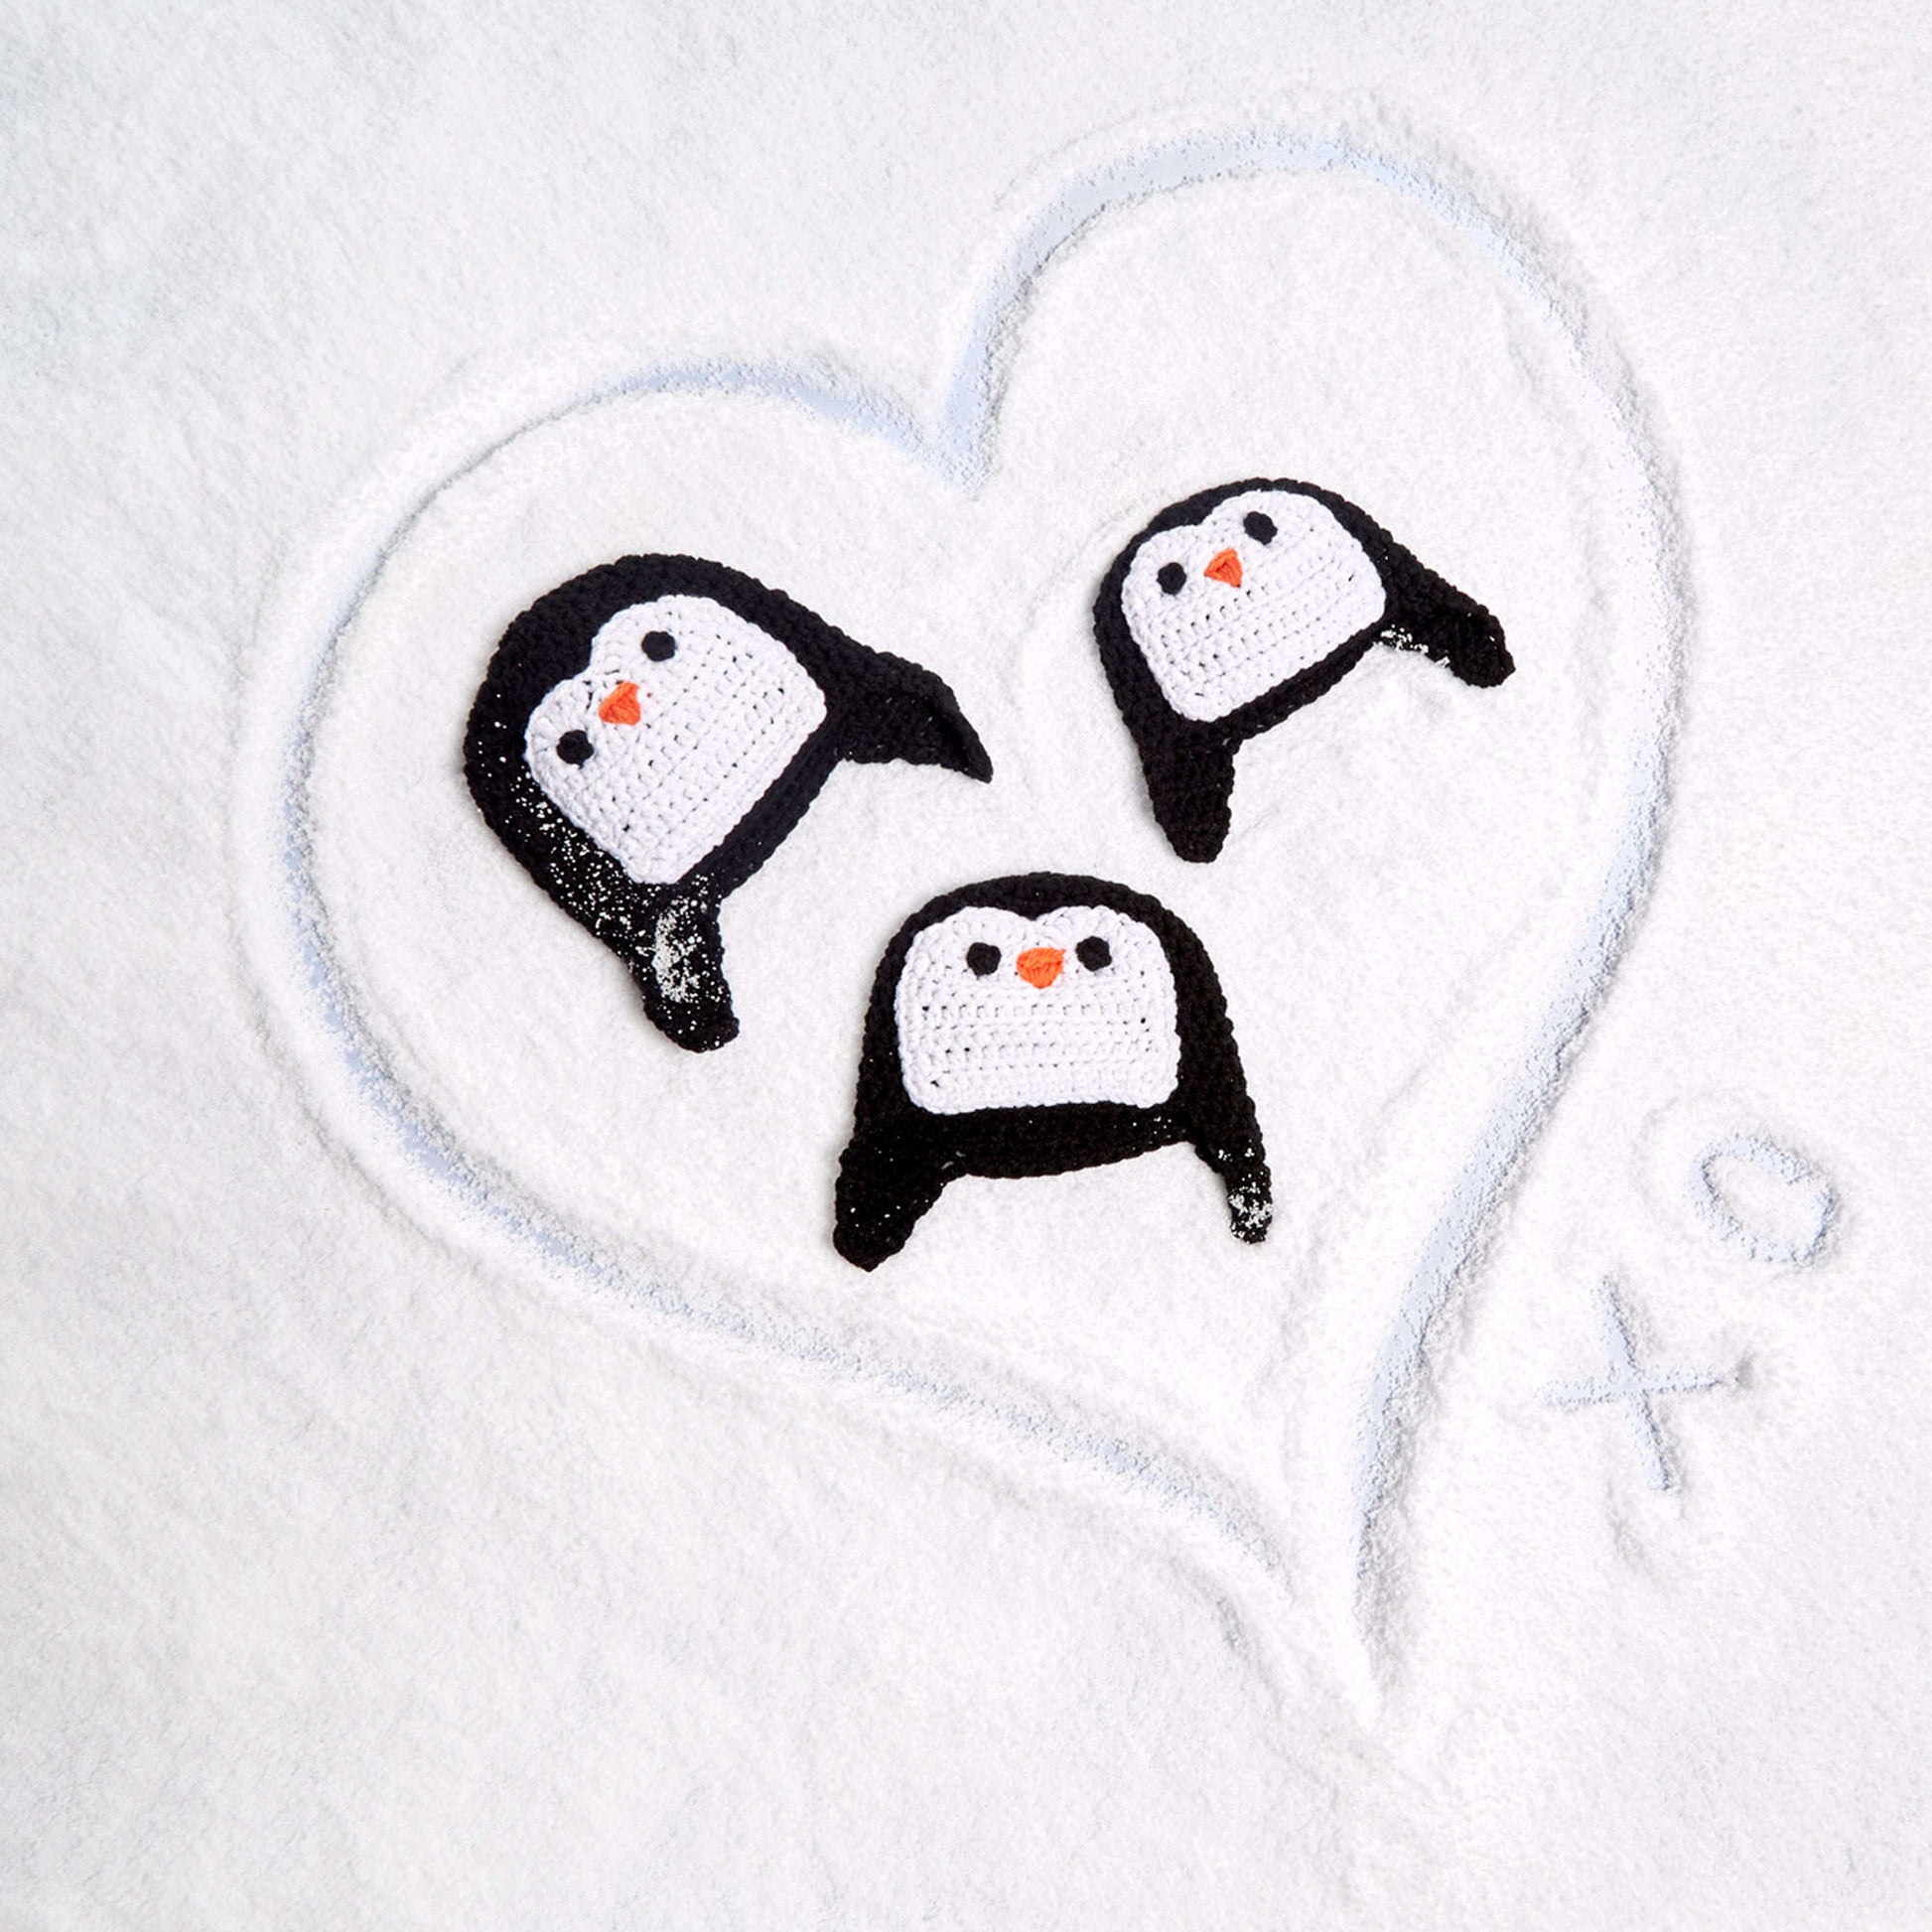 Free Red Heart Crochet Picture Perfect Penguin Hat Pattern